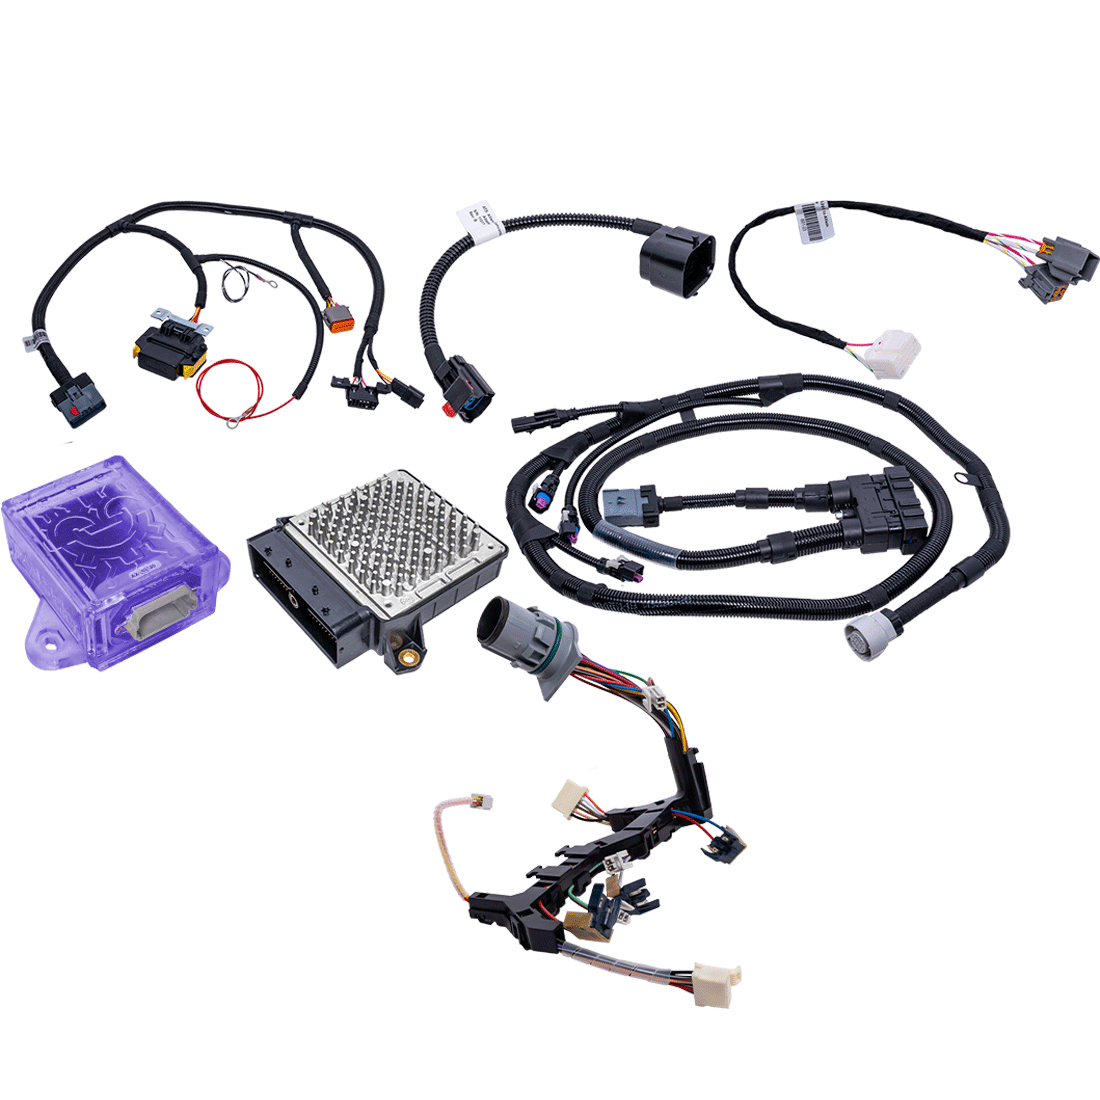 ATS 3190522356 Electronics Upgrade Kit Allison Conversion 68RFE 2010-2012 2006-2010 6 Speed Allison Used in Conversion